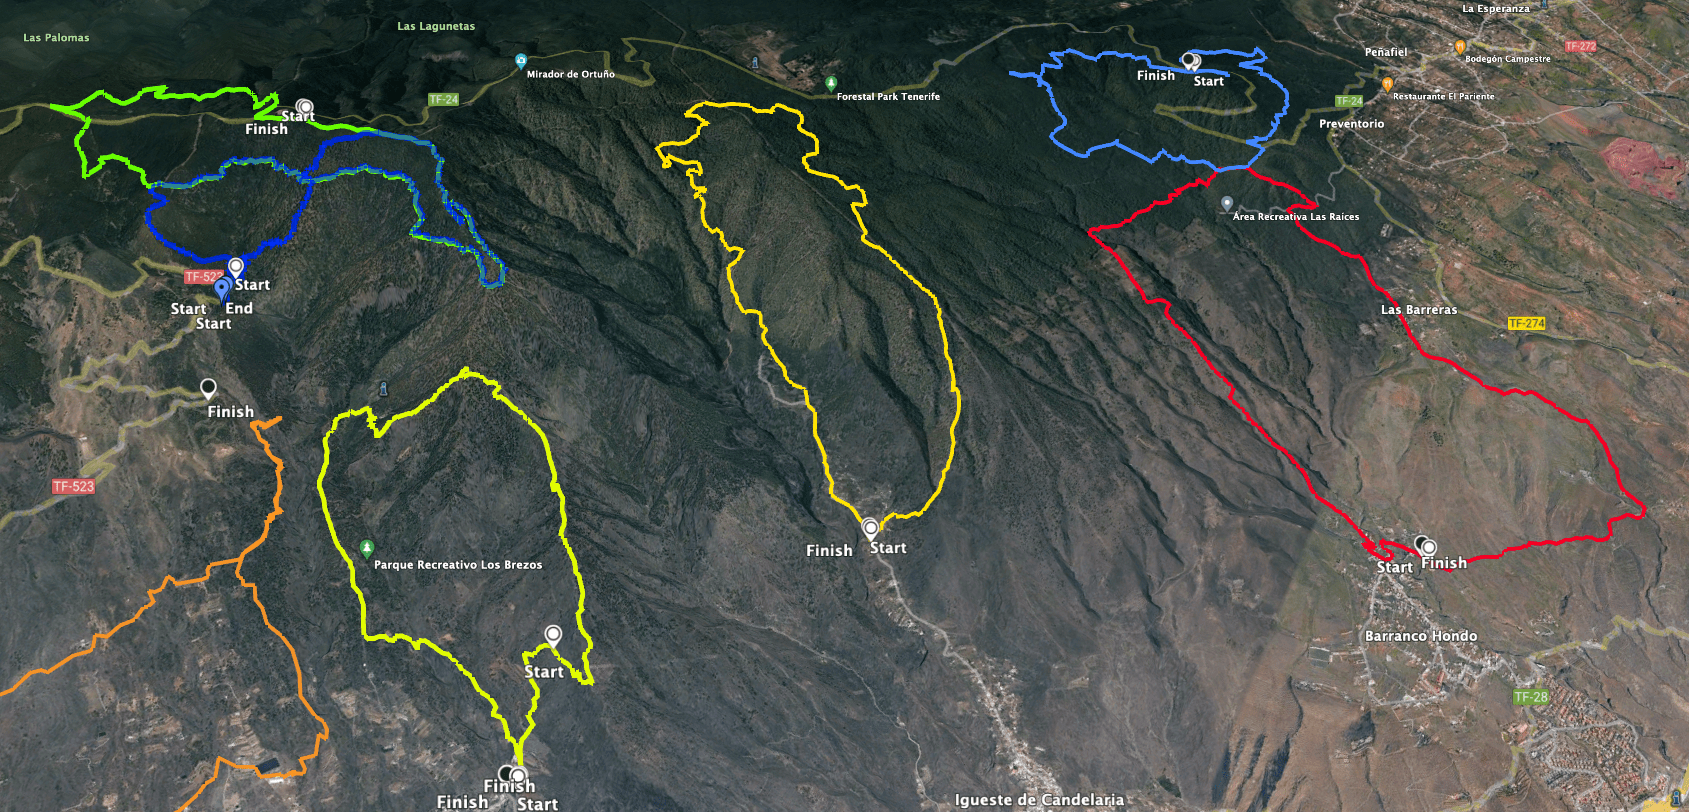 Track of the hike Igueste de Candelaria (centre yellow) and left of it track Igonse (yellow) right in red round trip Barranco Hondo and top left round trip high above Candelaria (blue, green)